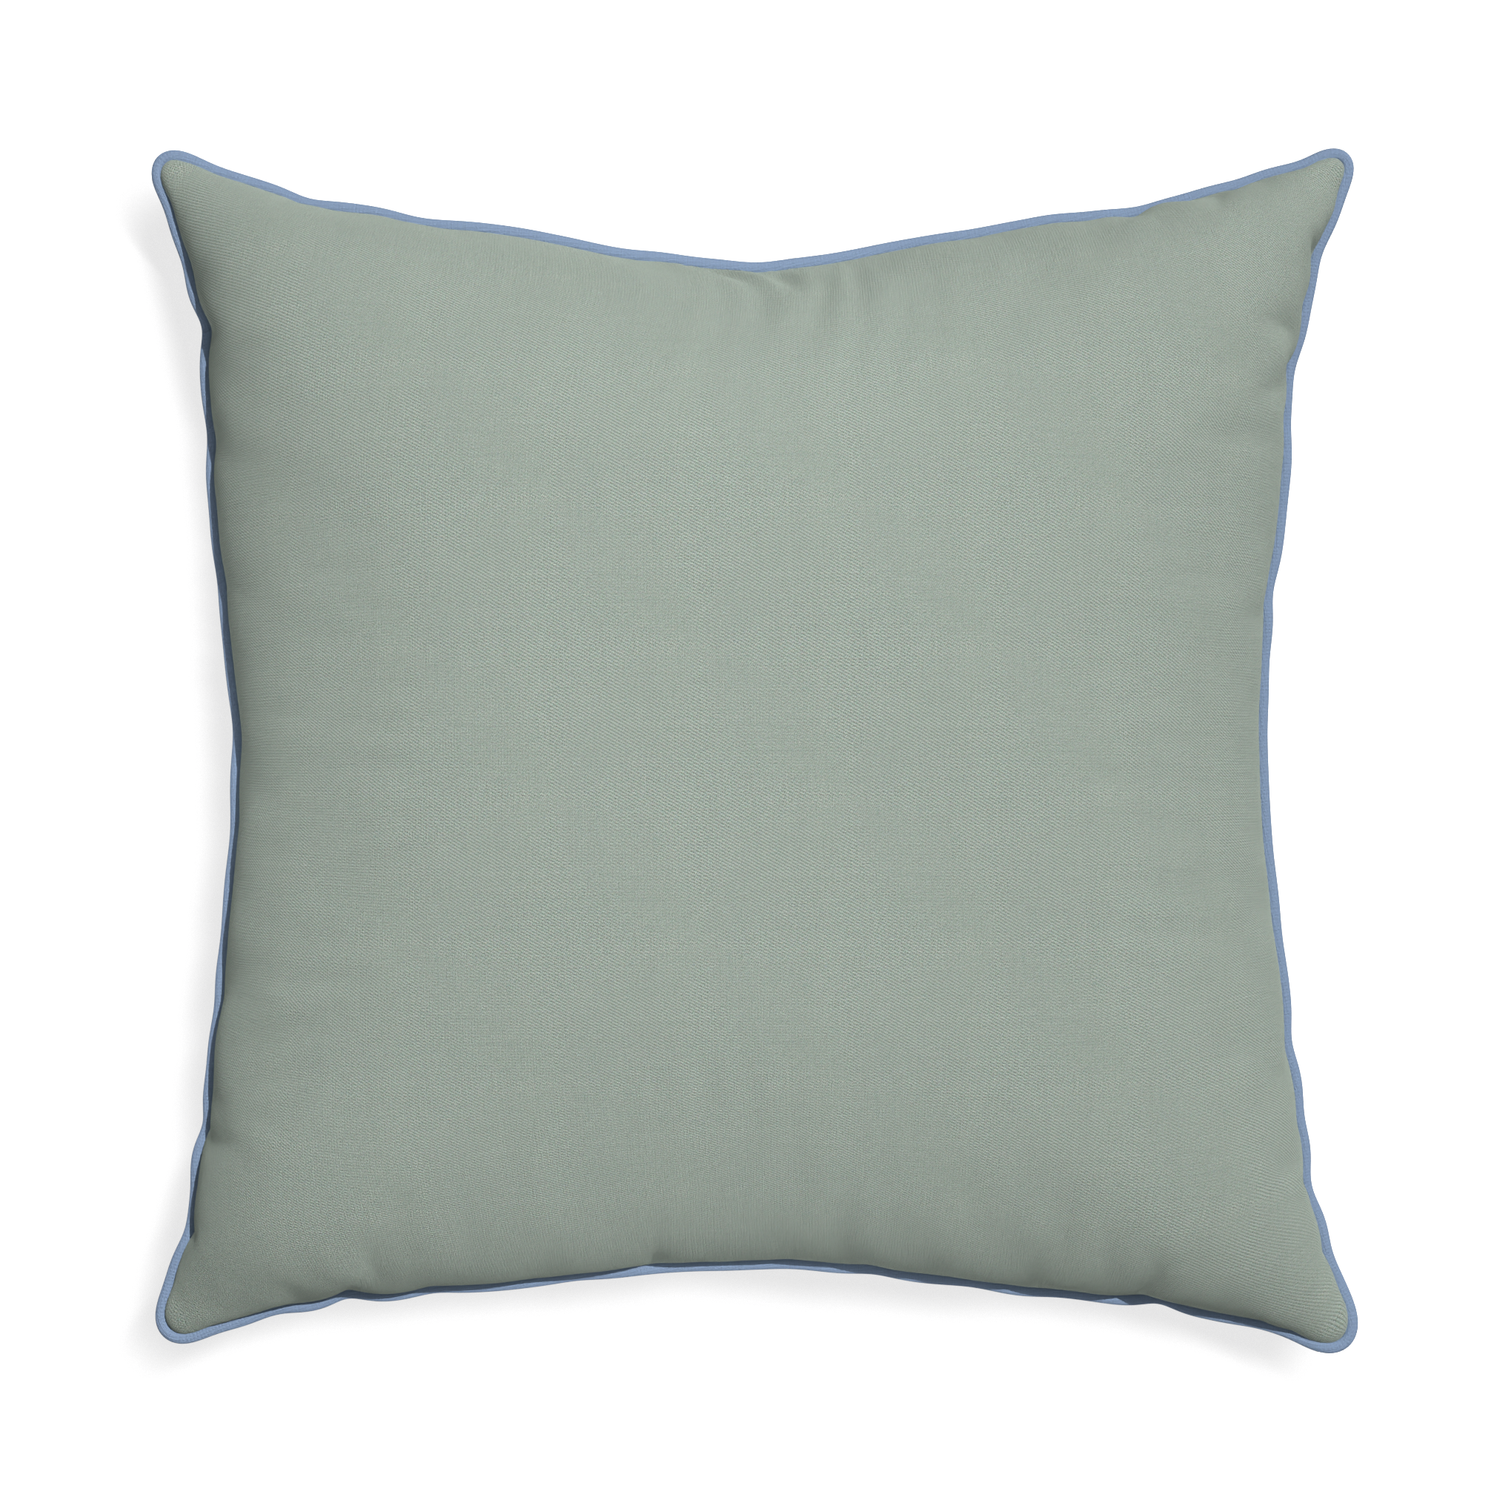 Euro-sham sage custom pillow with sky piping on white background